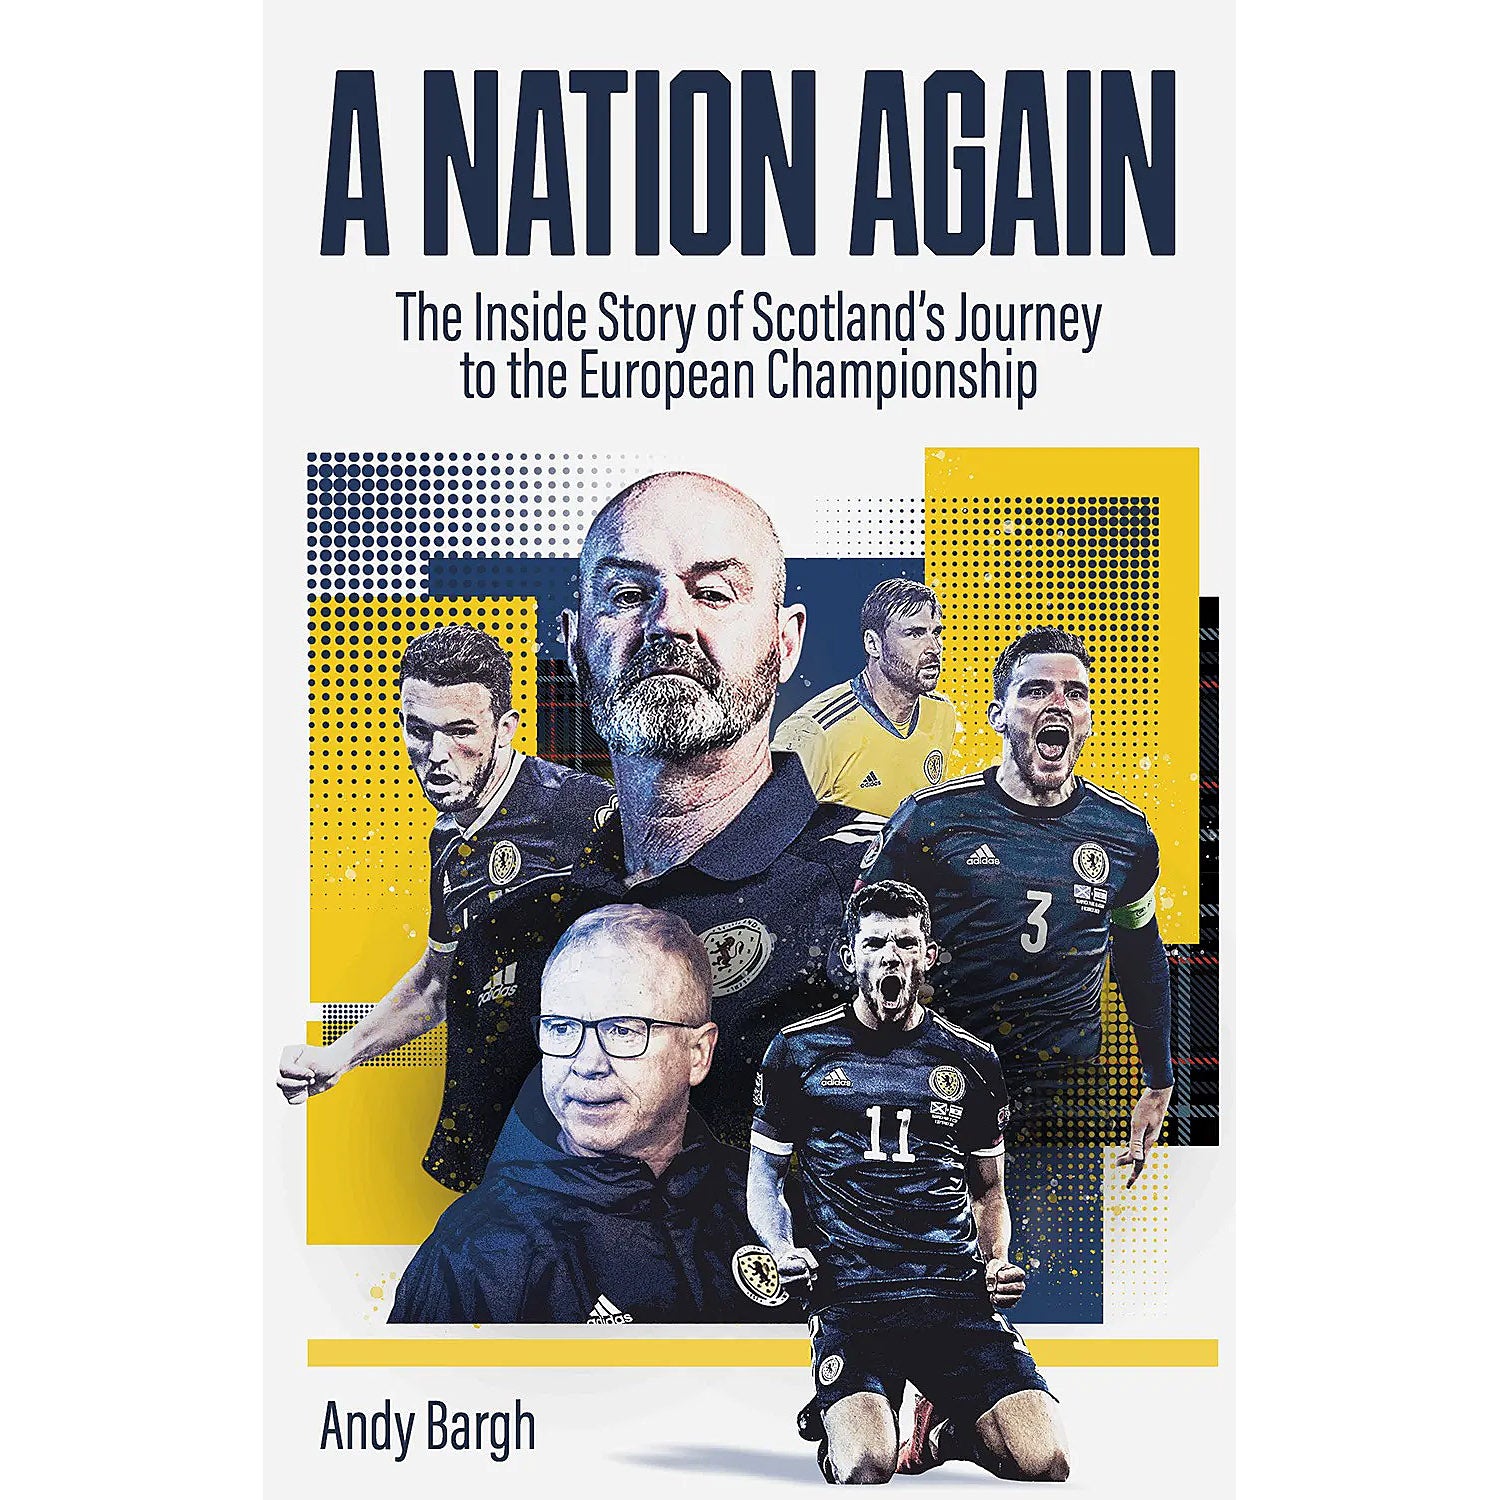 A Nation Again – The Inside Story of Scotland's Journey to the European Championship